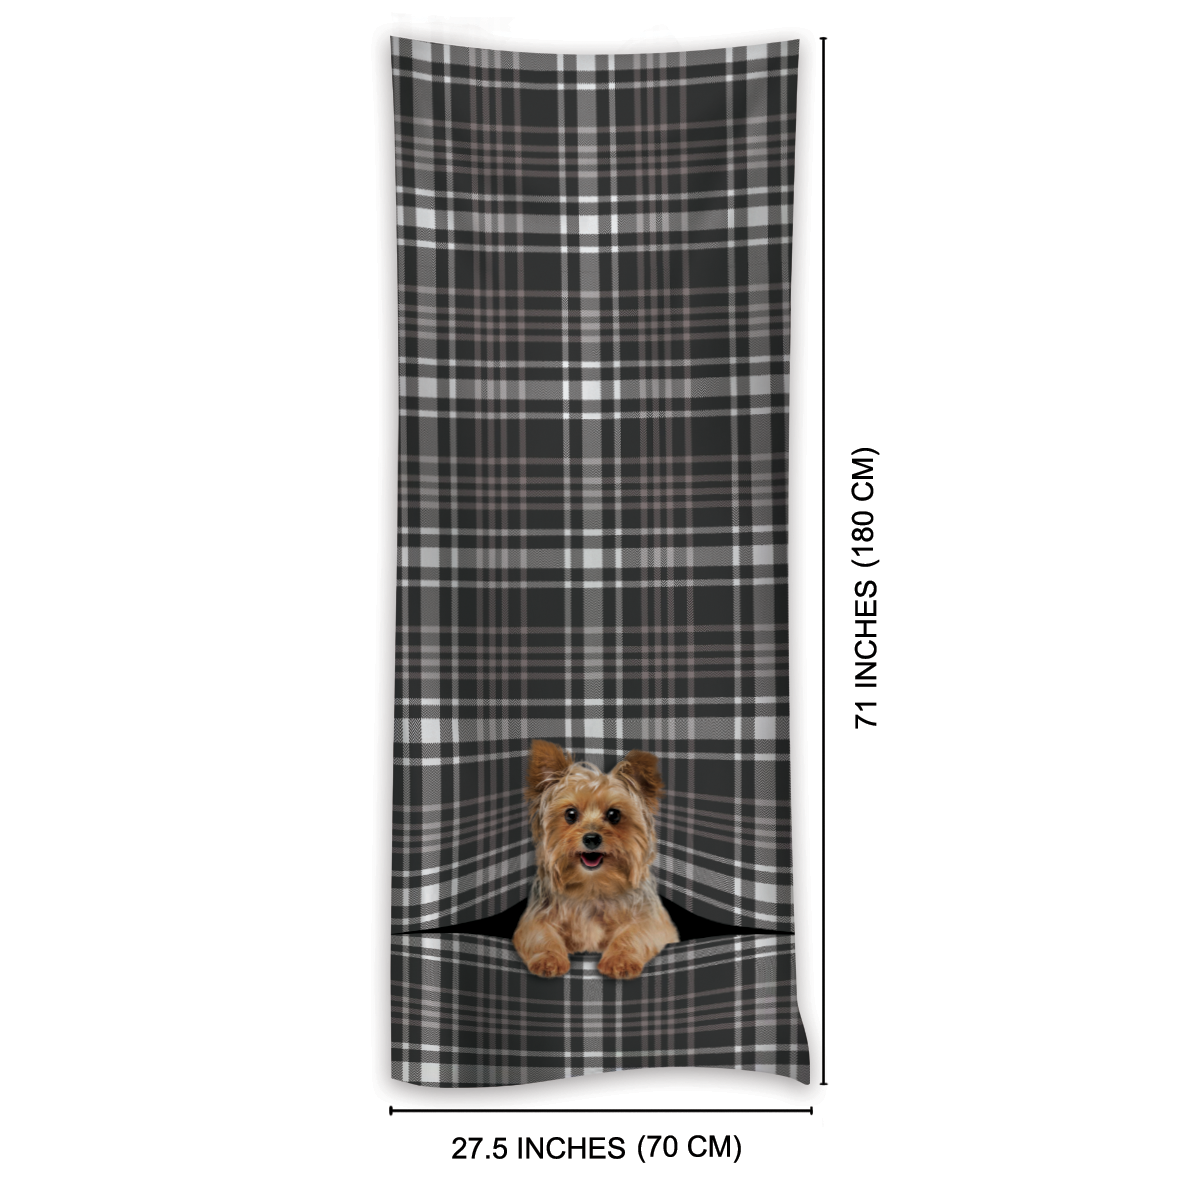 Keep You Warm - Yorkshire Terrier - Scarf V2